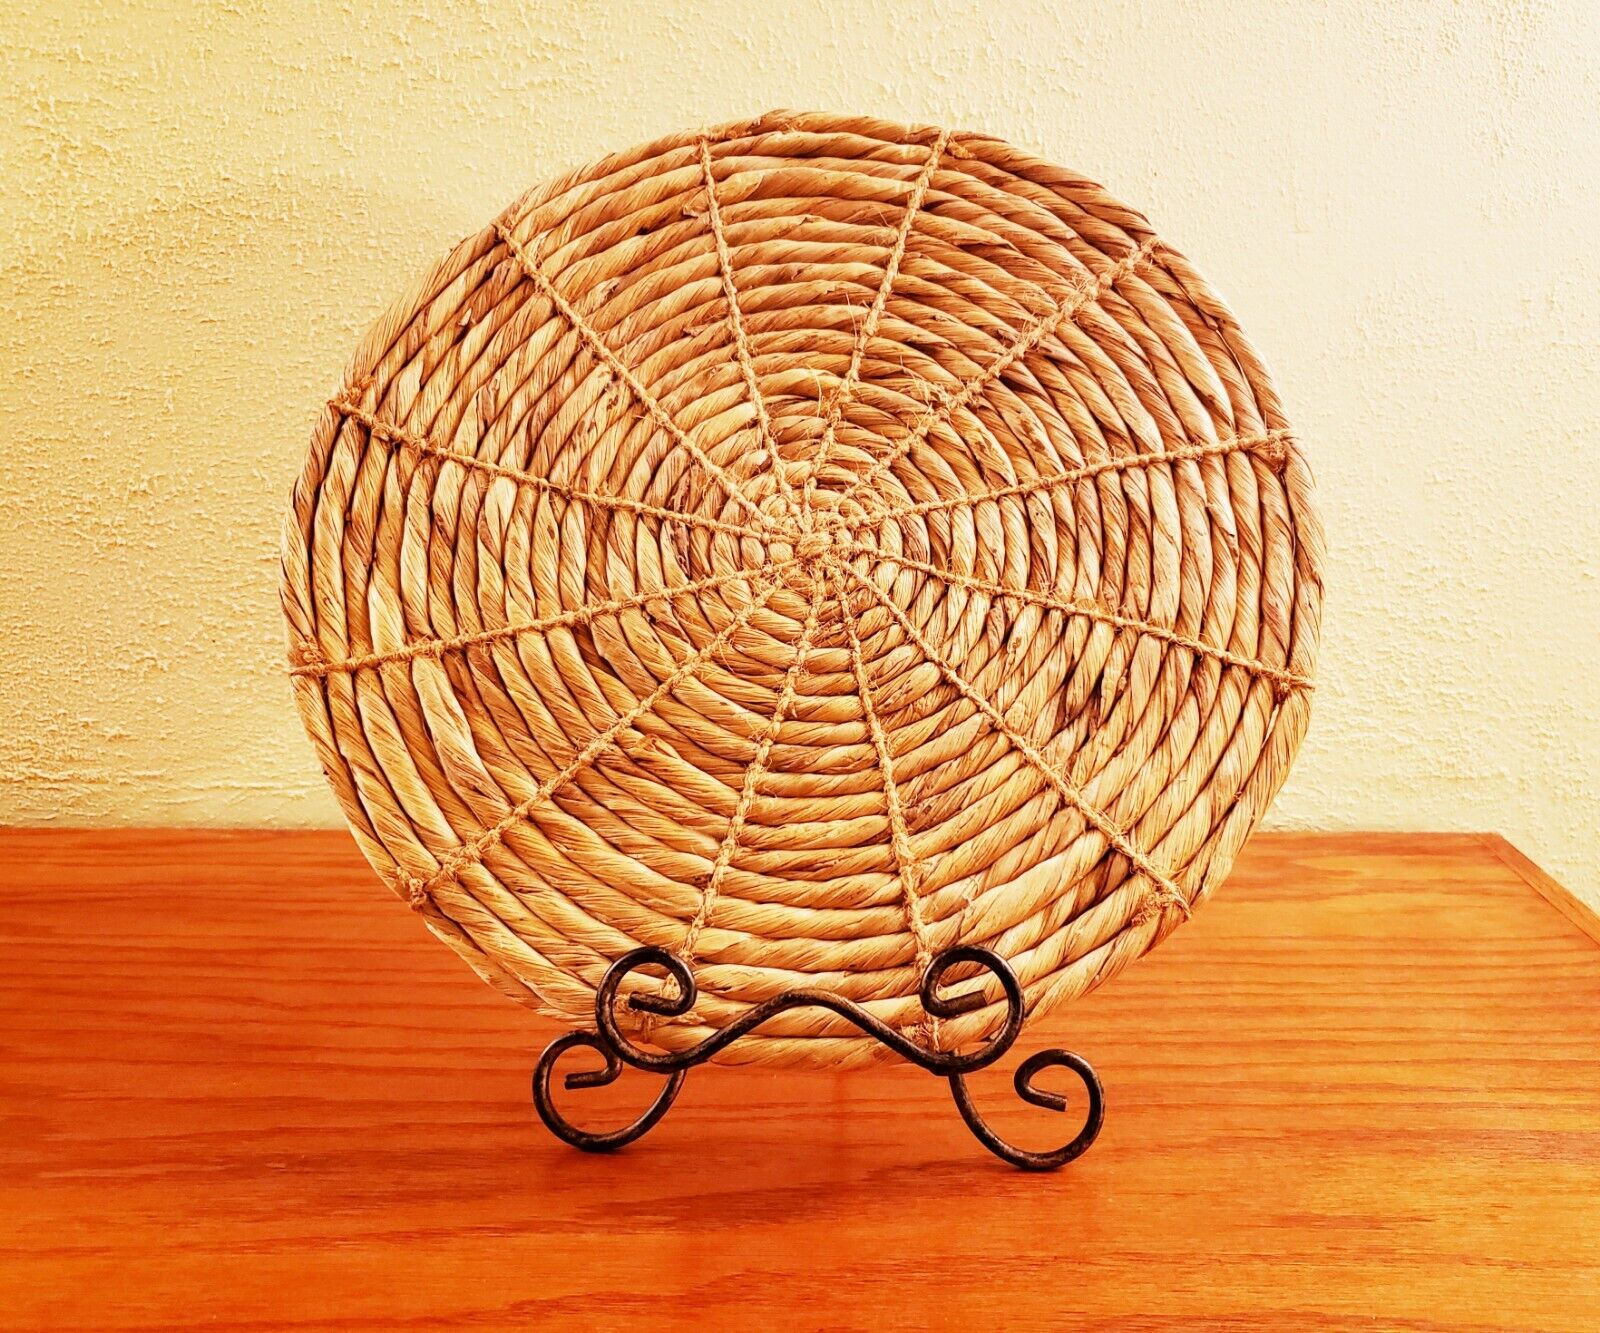 Vintage Handcrafted Woven Large Hot Plate Trivet Fall Holiday Farmhouse Decor